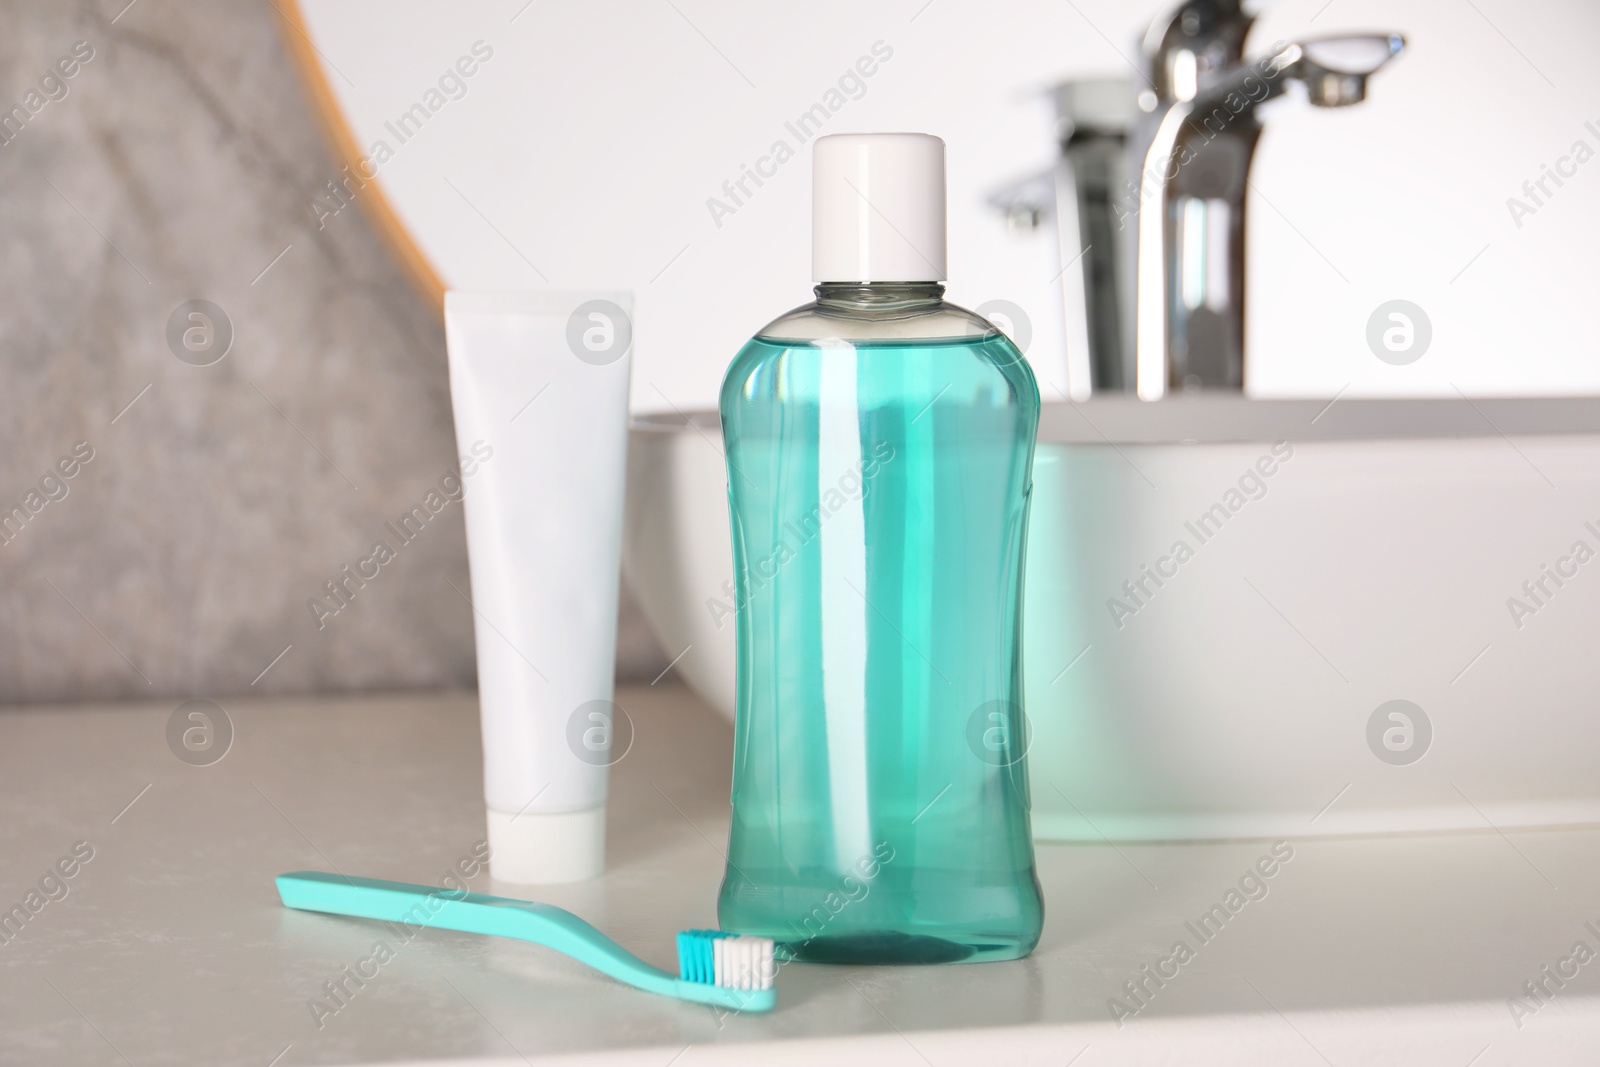 Photo of Bottle of mouthwash, toothpaste and toothbrush on light countertop in bathroom